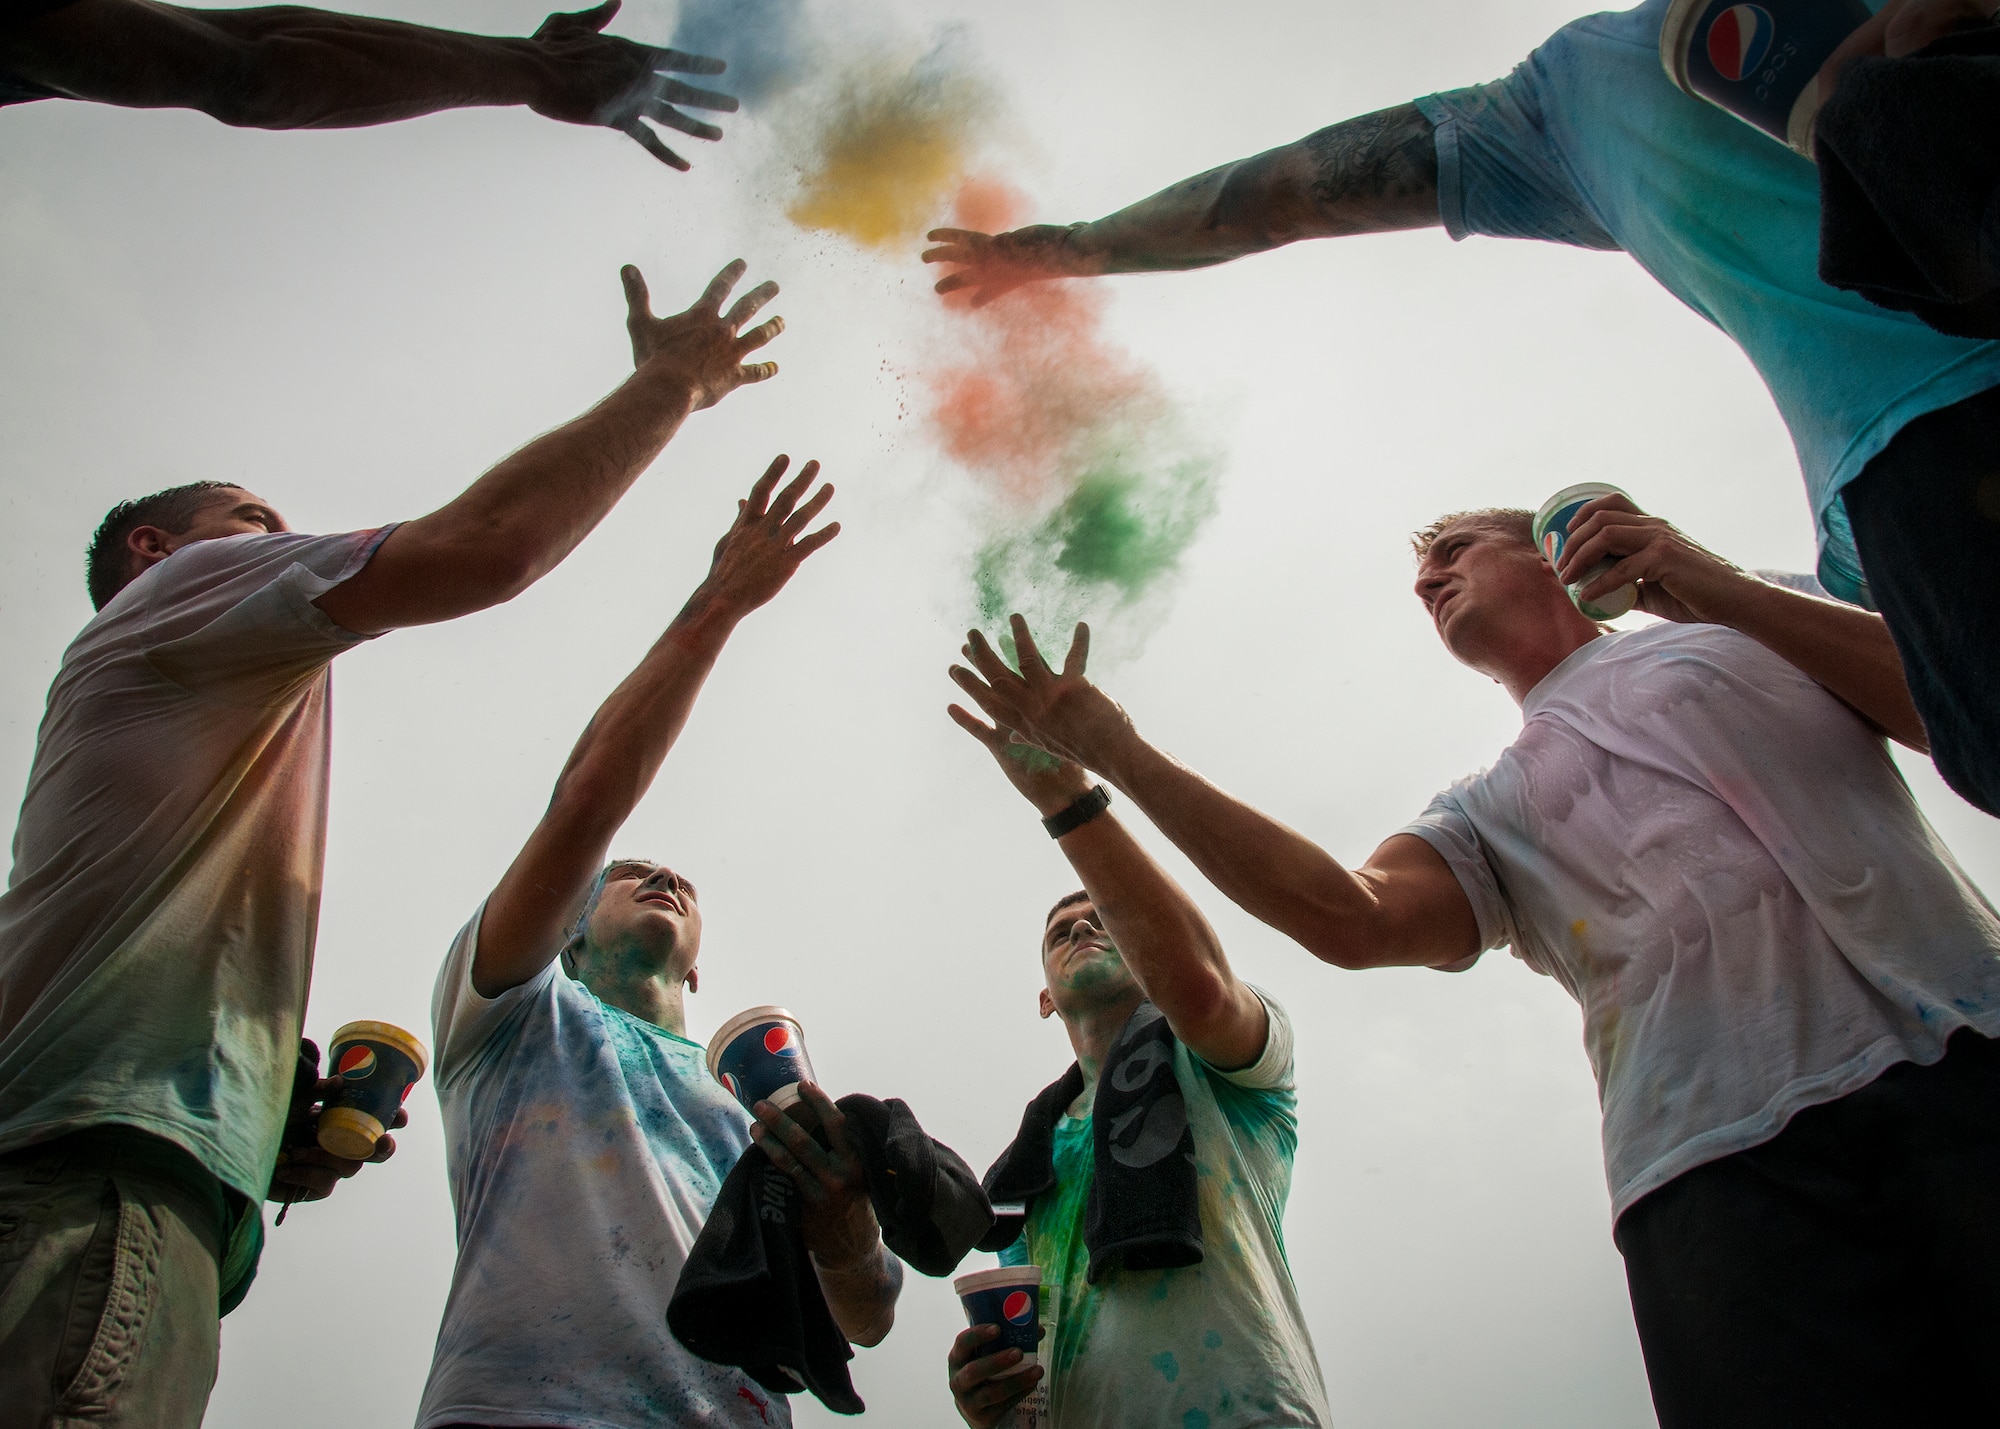 Participants get colorful during the Color Me Aware fun run April 4, at Eglin Air Force Base, Fla.  Approximately 30 volunteers helped more than 450 participants get colorful during three color zones of the three-mile run.  The event highlighted the start of Sexual Assault Awareness Month. (U.S. Air Force photo/Tech. Sgt. Jasmin Taylor)